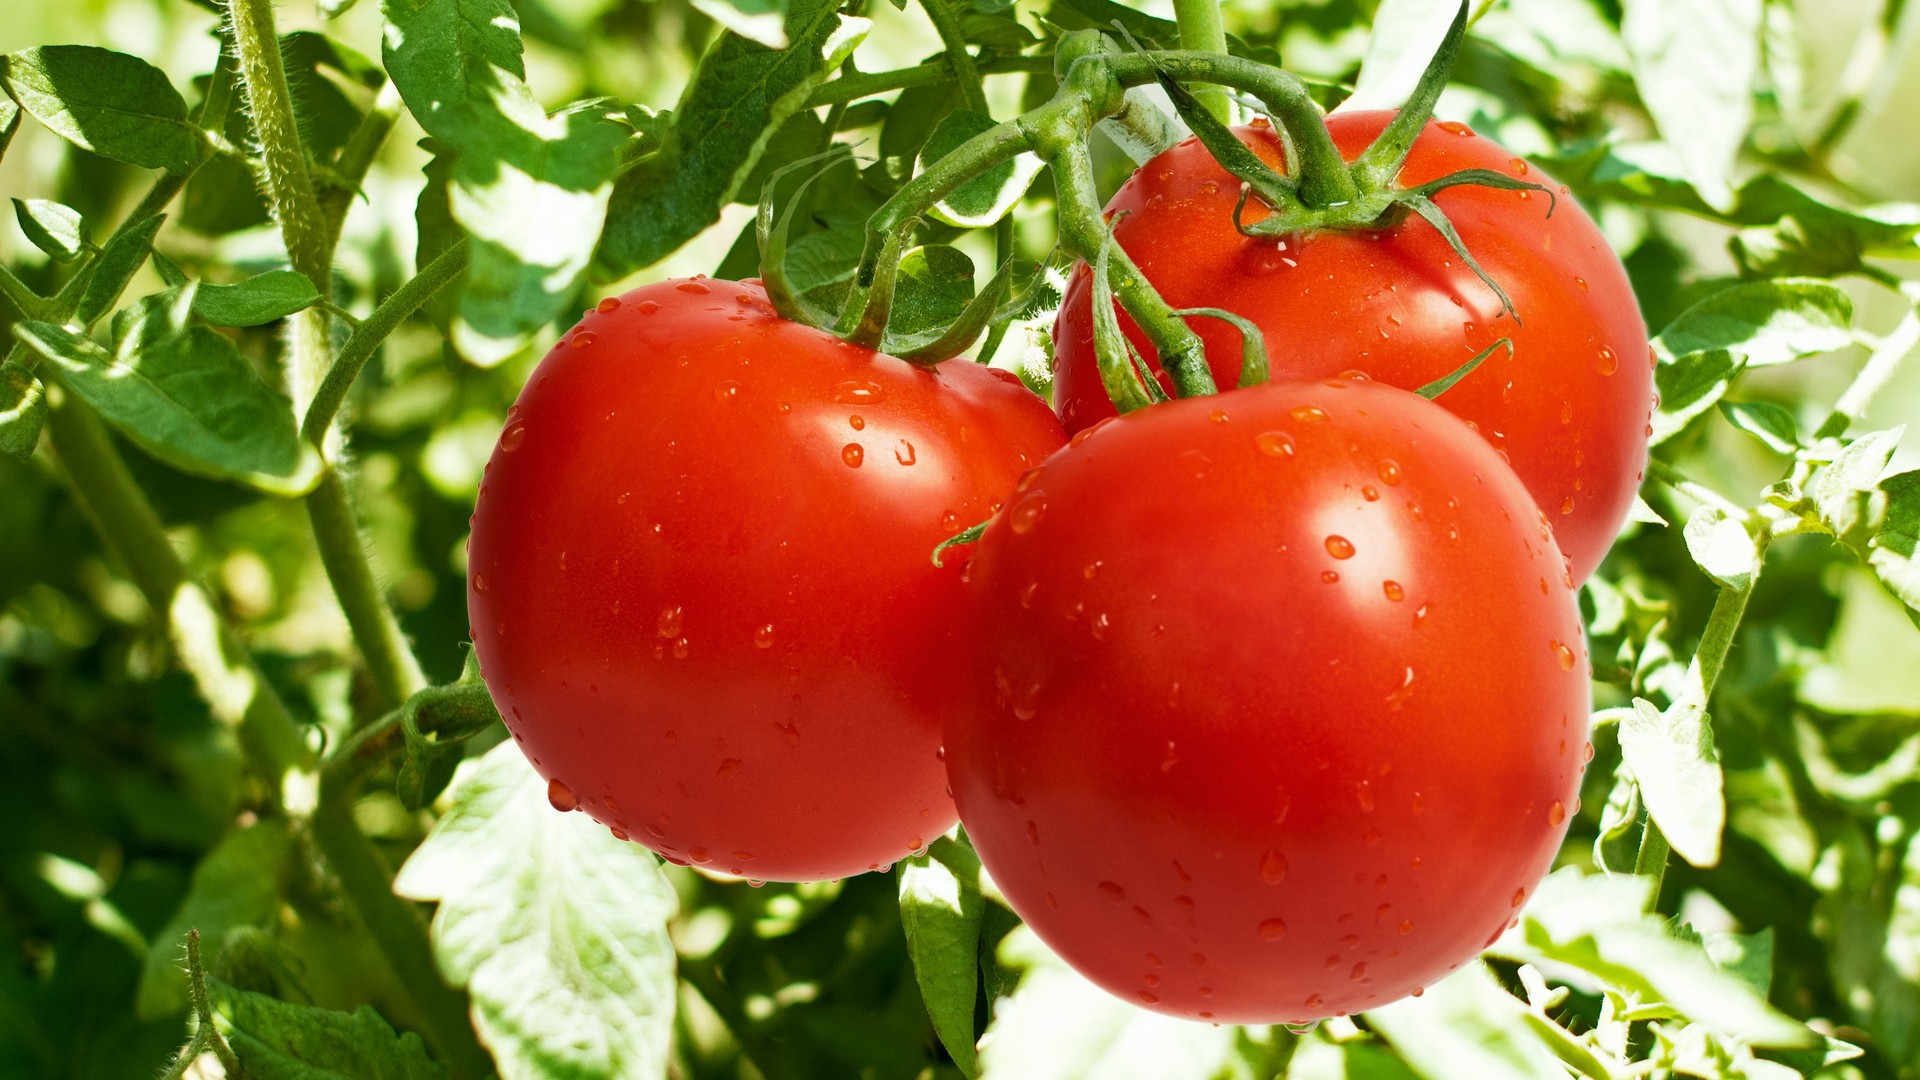 Image result for tomatoes